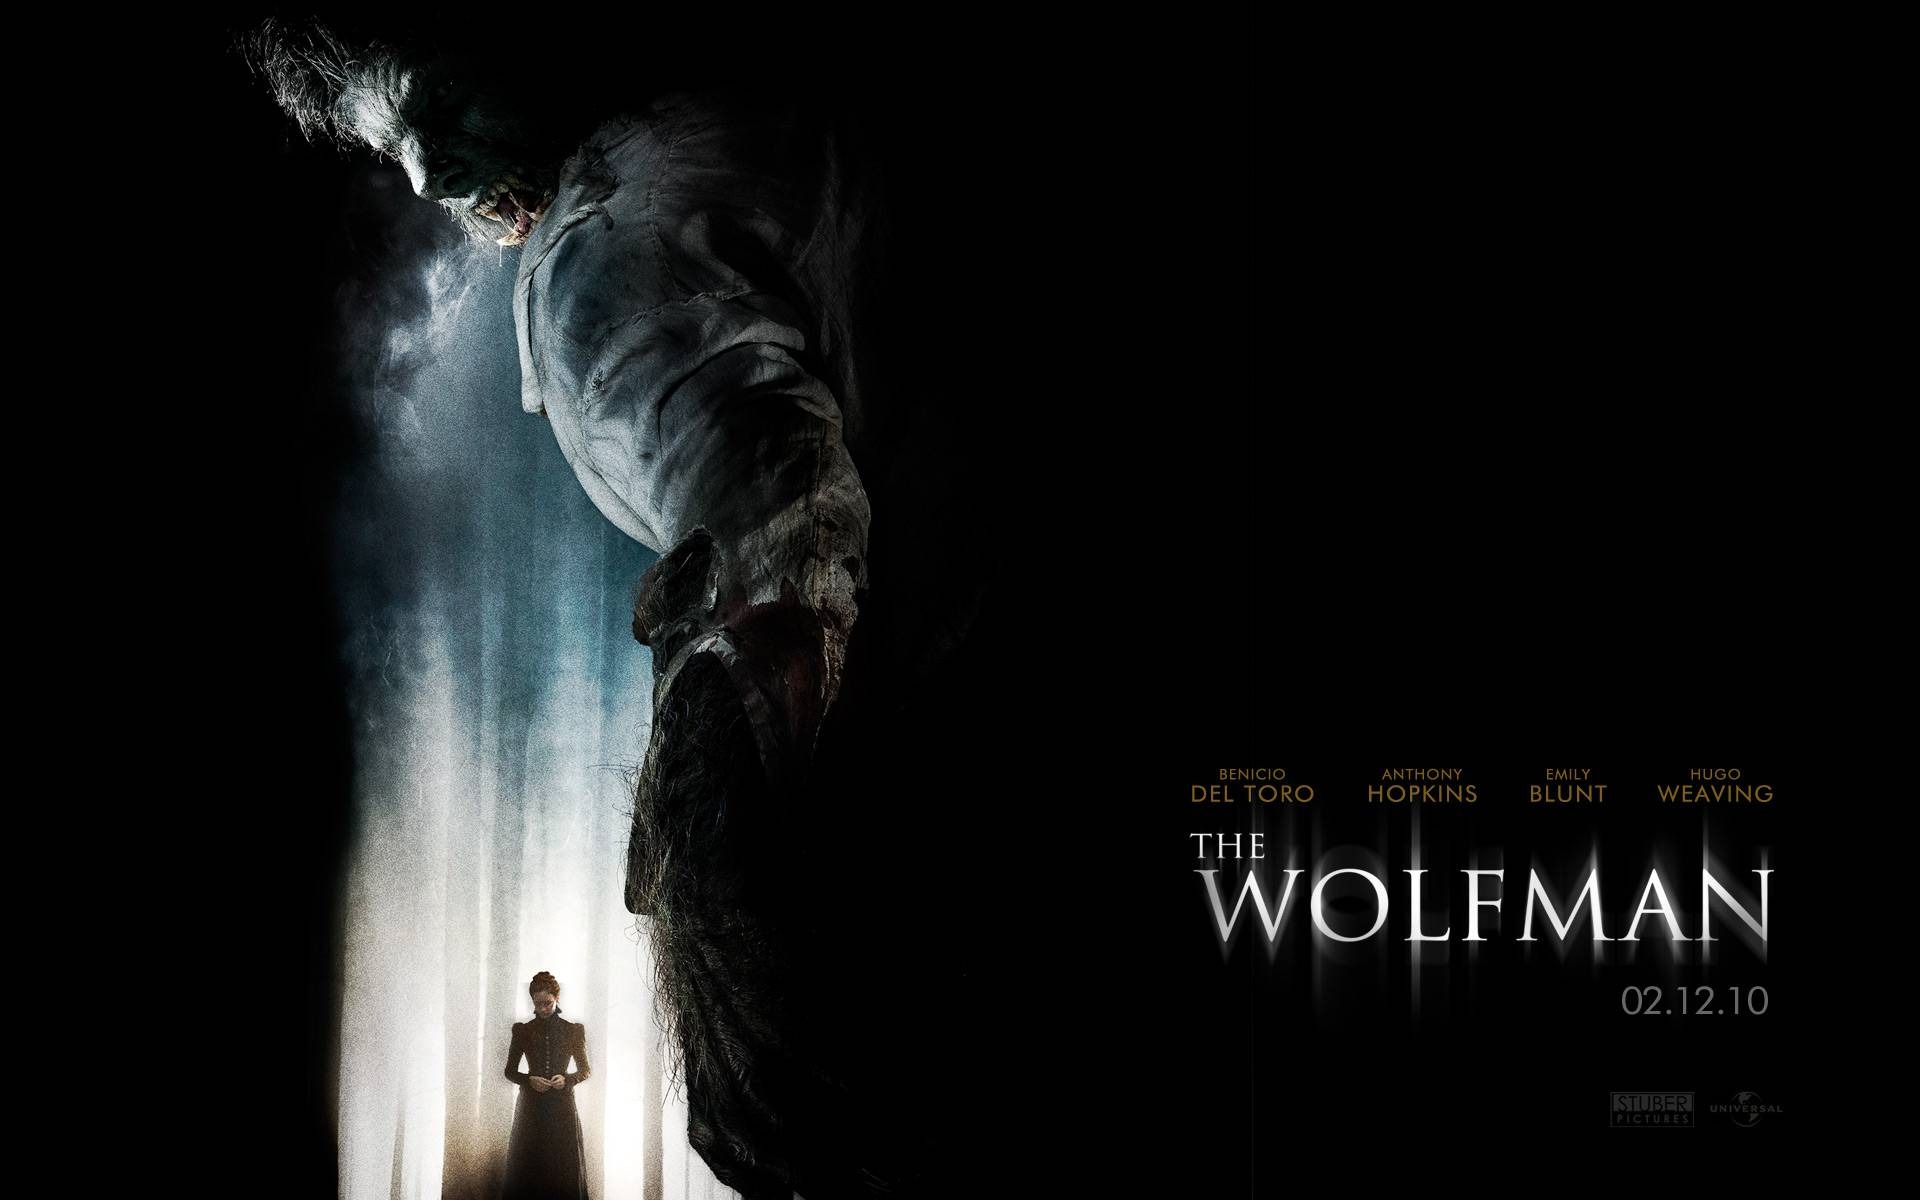 The Wolfman Movie Wallpapers #6 - 1920x1200